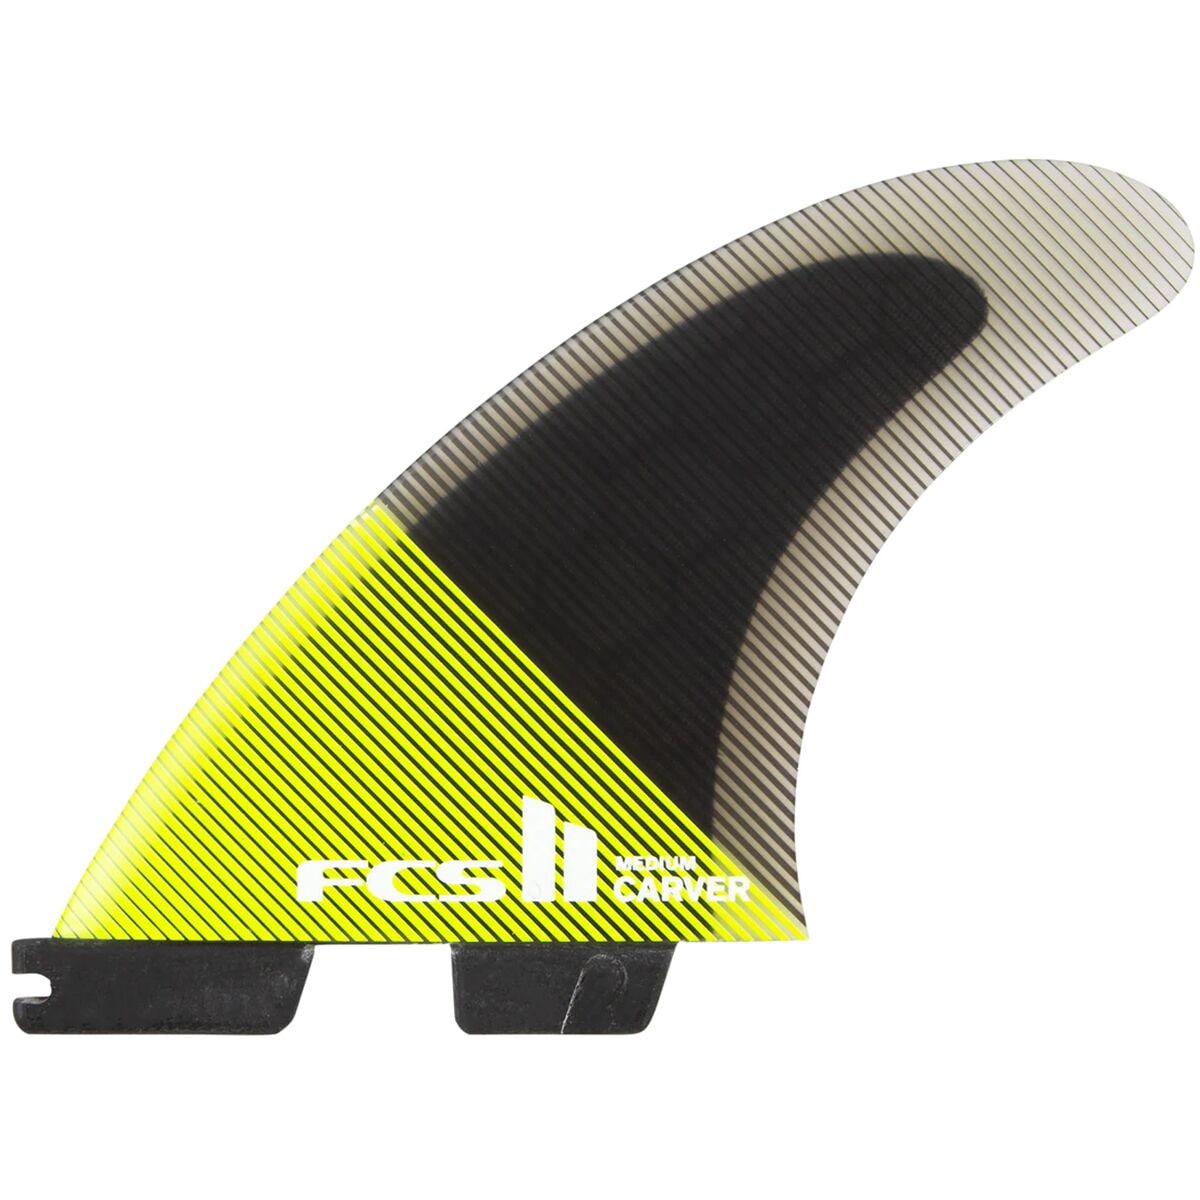 FCS Carver PC Thruster Surfboard Fins